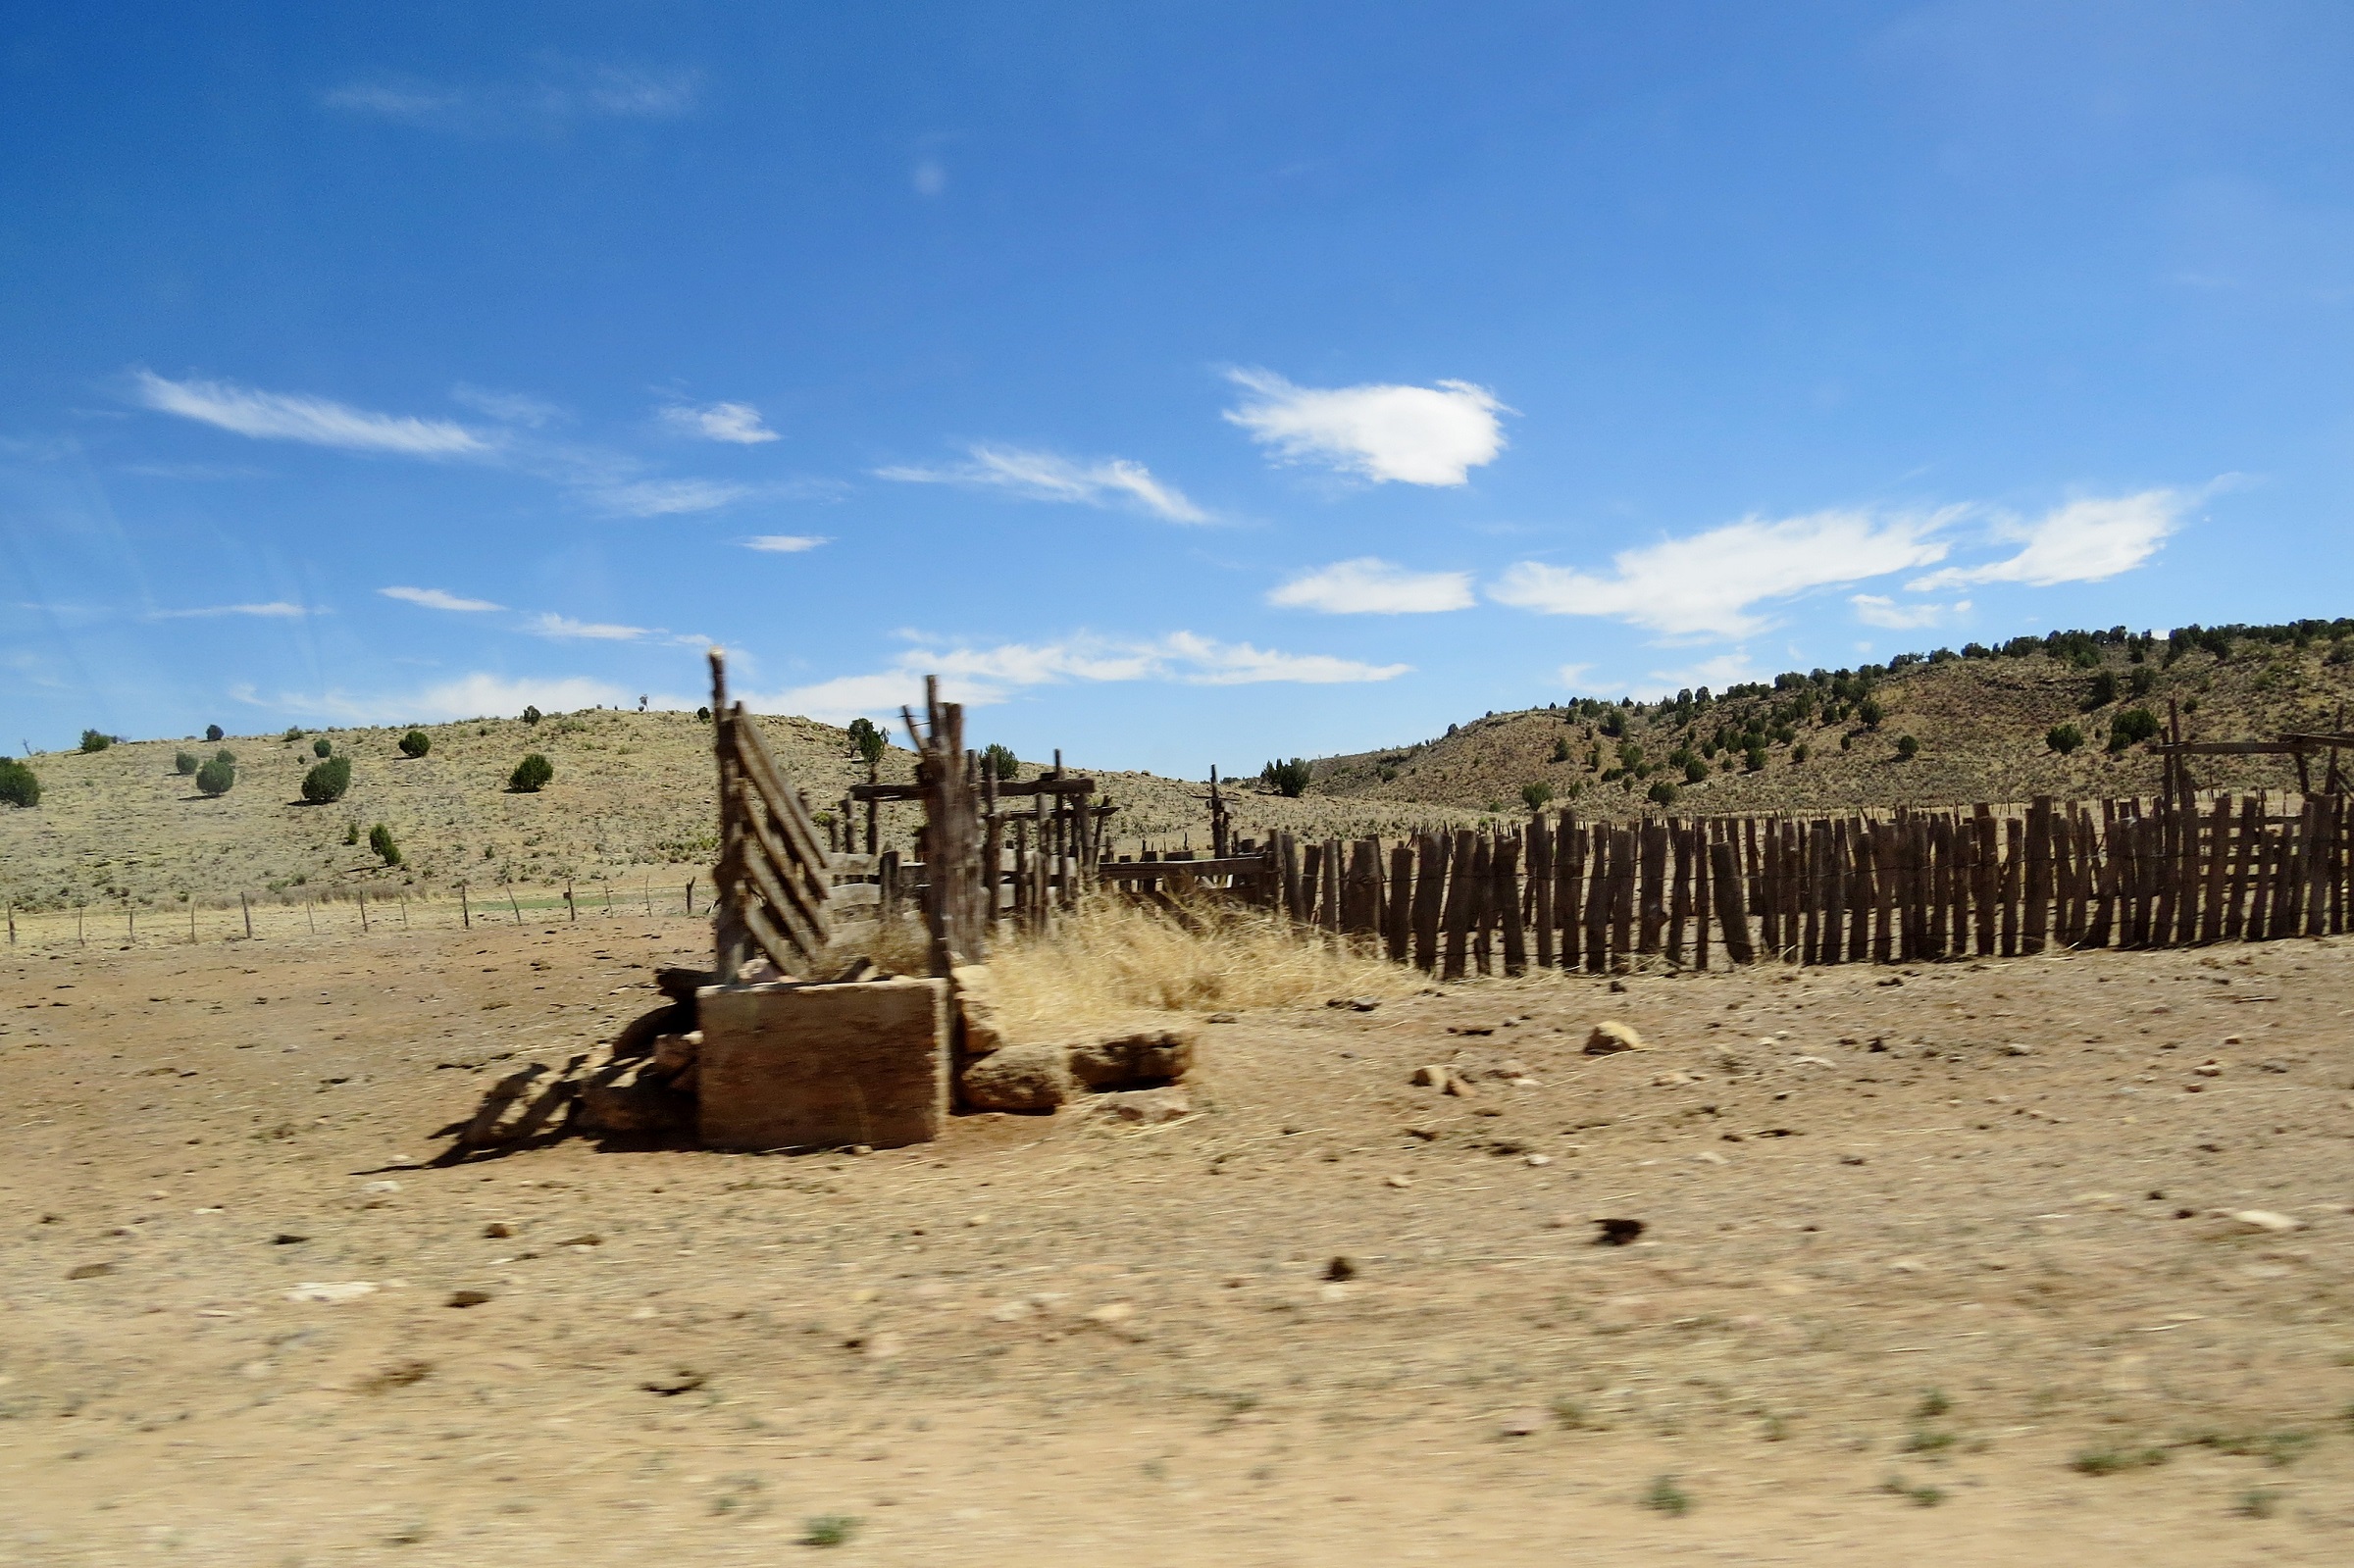 A corral and cattle loading ramp somewhere on the Arizona Strip